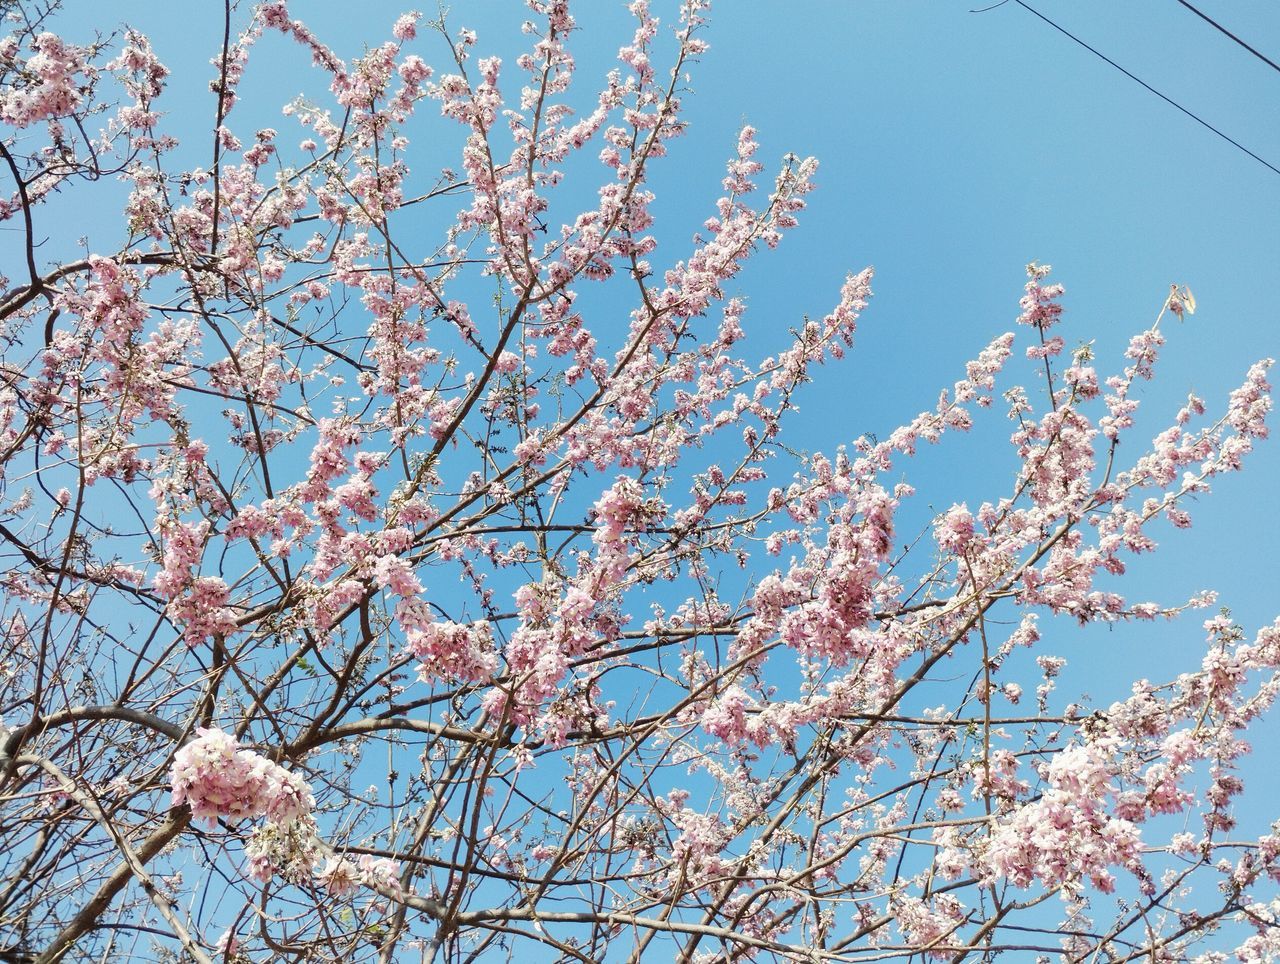 plant, tree, sky, low angle view, flower, pink, blossom, springtime, branch, beauty in nature, nature, flowering plant, growth, fragility, freshness, no people, clear sky, blue, cherry blossom, day, spring, outdoors, produce, cherry tree, fruit tree, tranquility